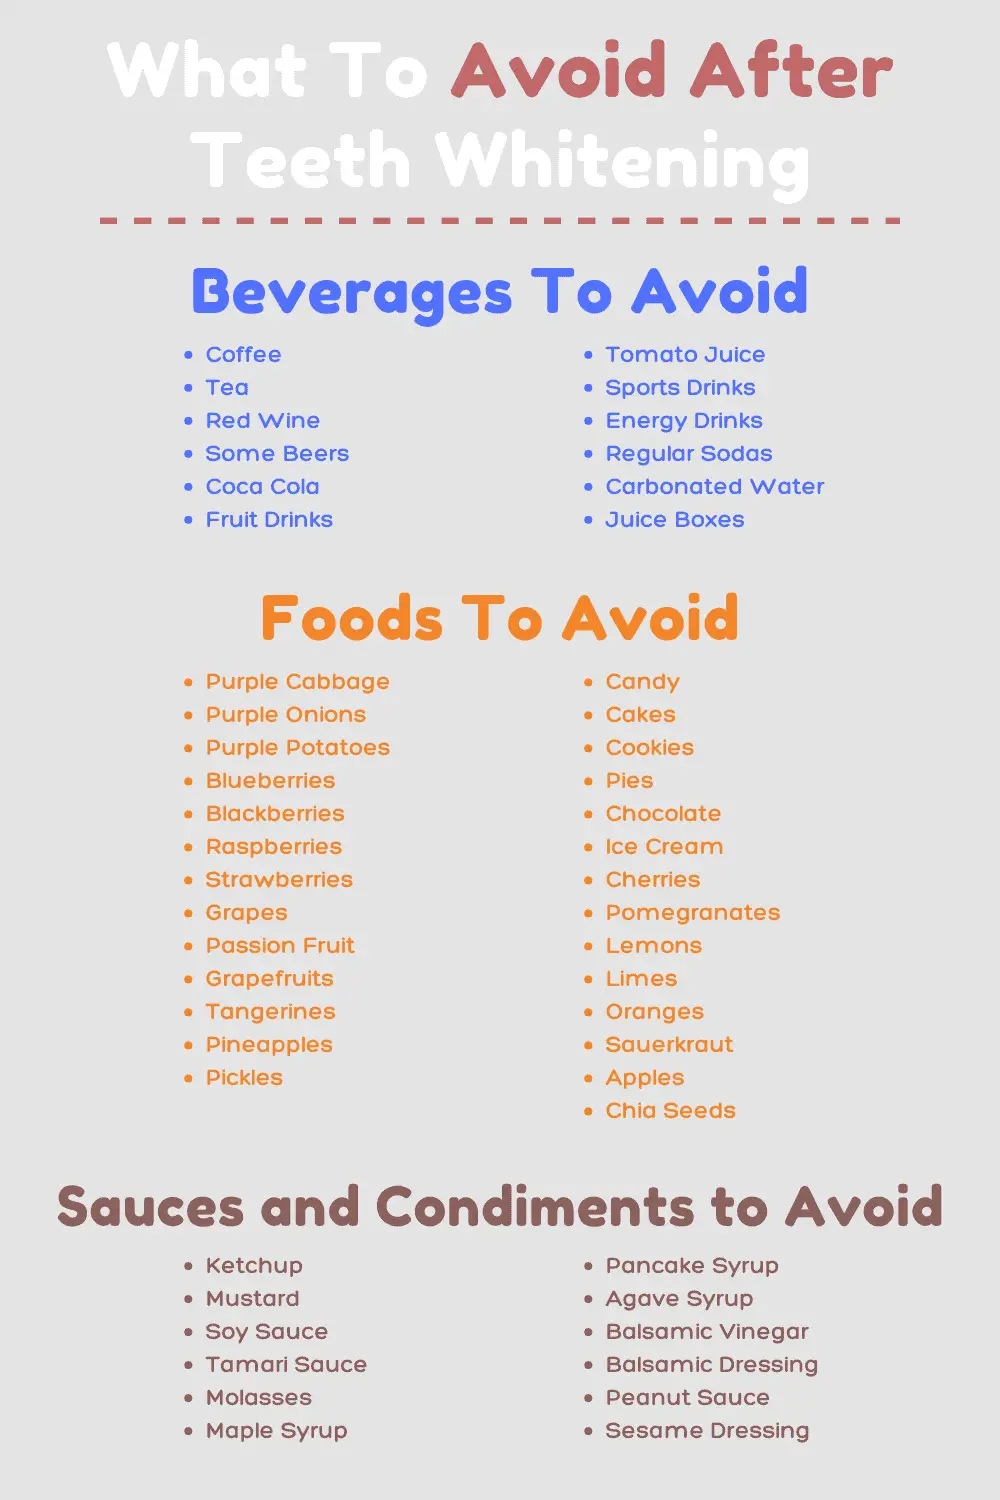 what to avoid after teeth whitening, including beverages to avoid, foods to avoid and sauces and condiments to avoid